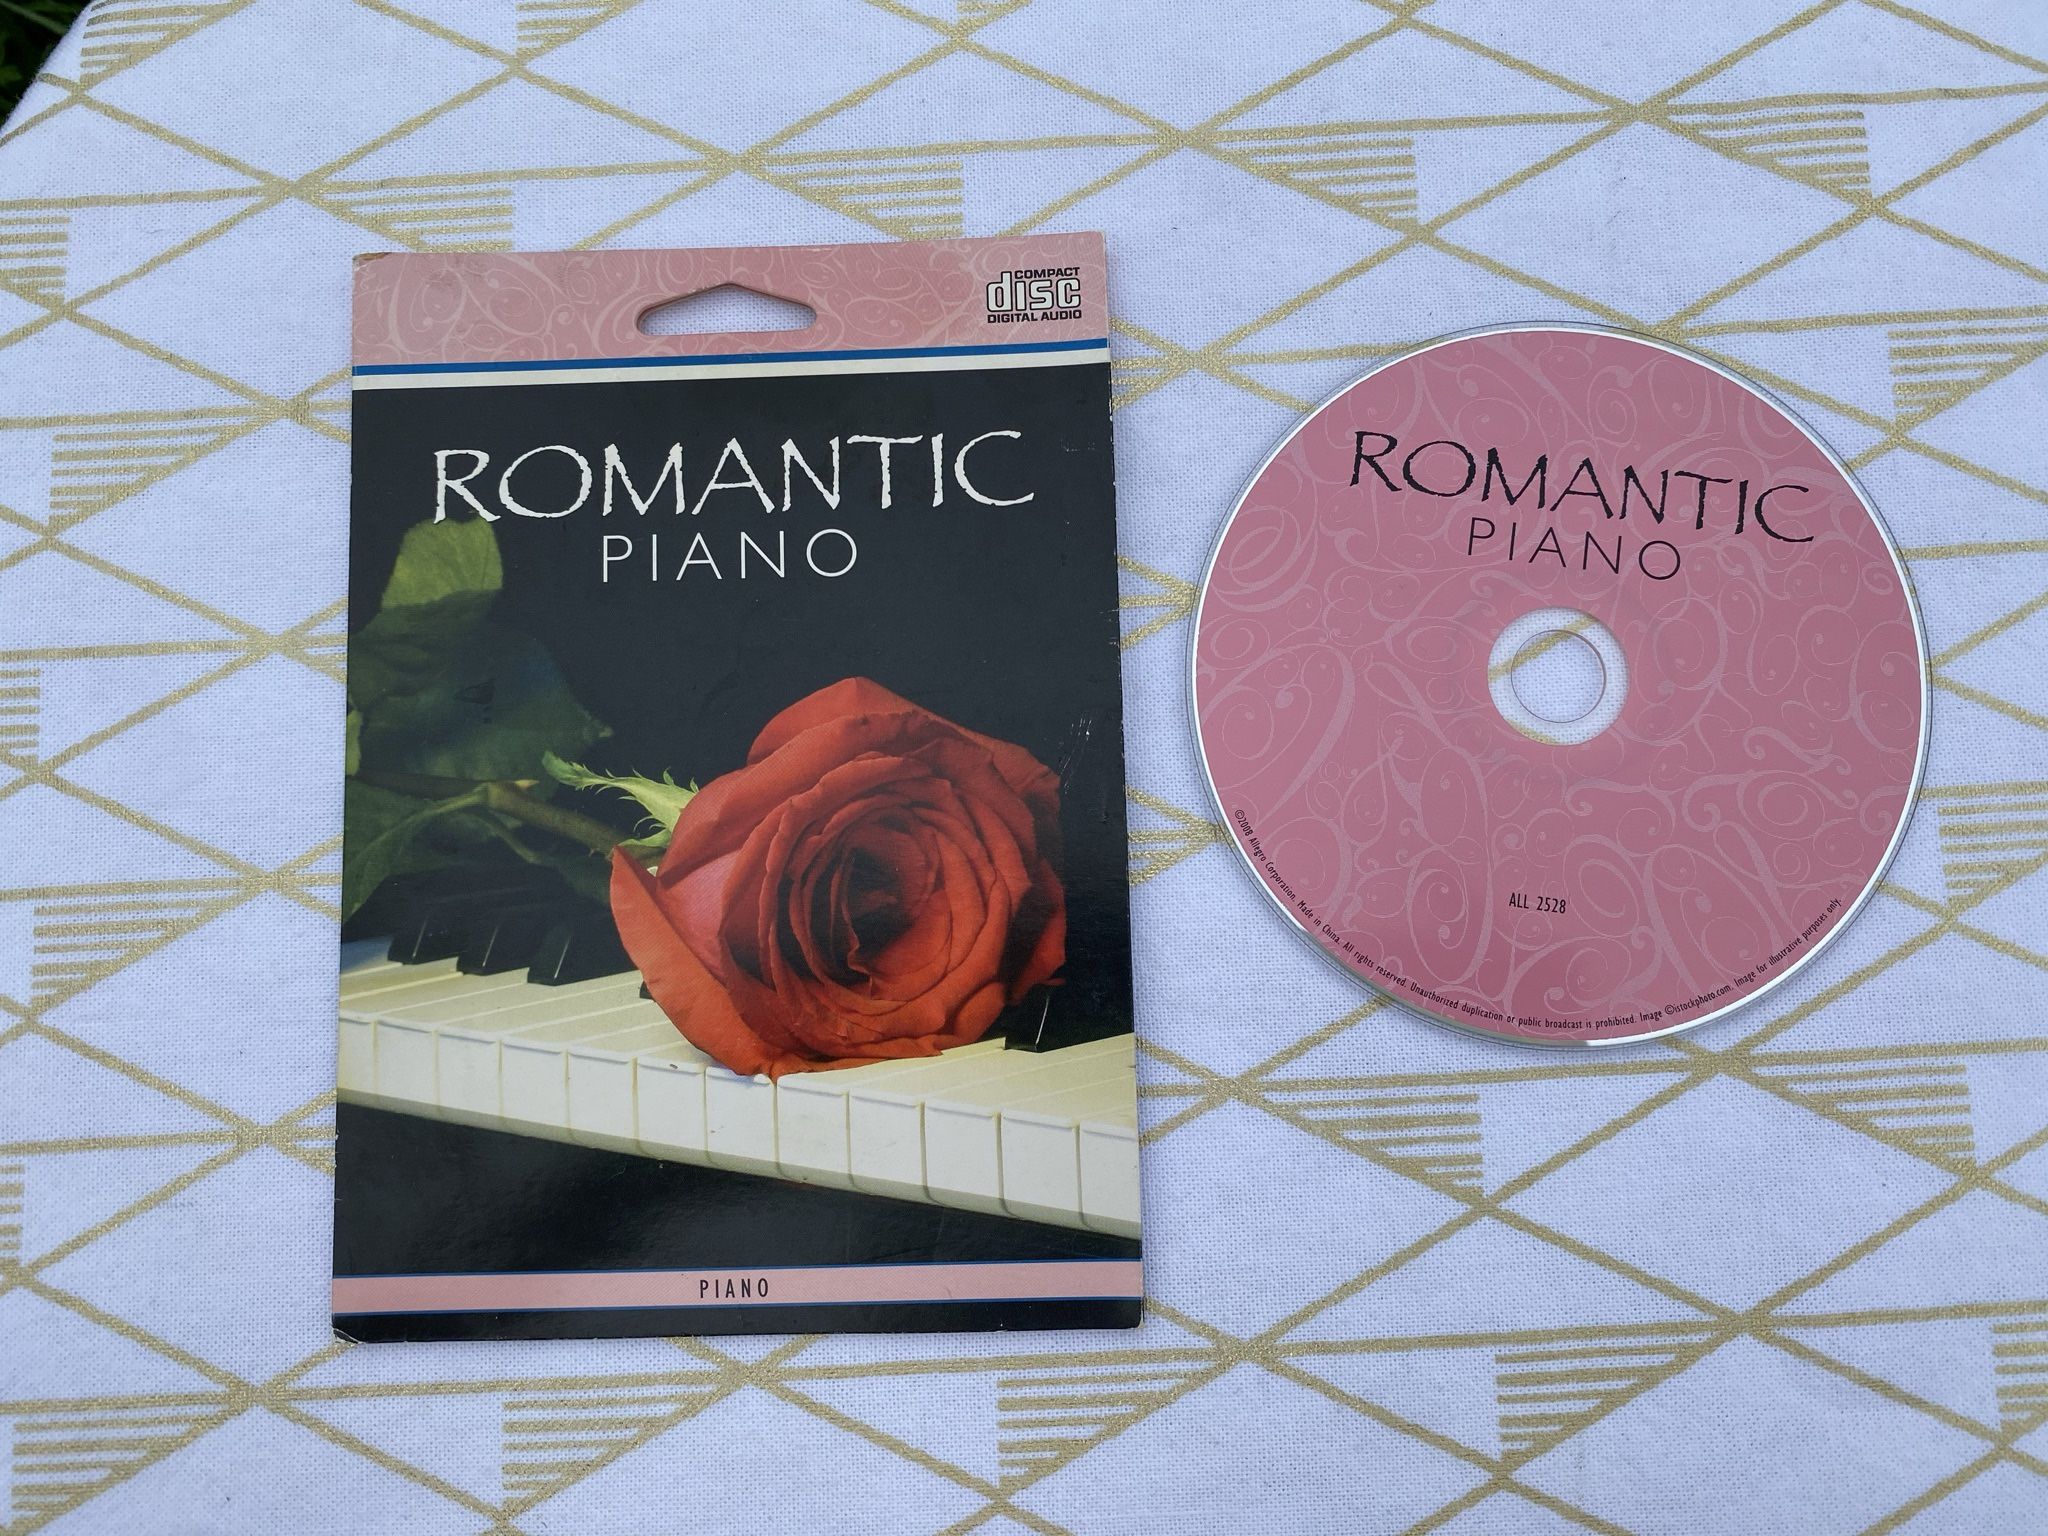 Romantic Piano Music Instrumental Classical Melodies CD / Various Composers